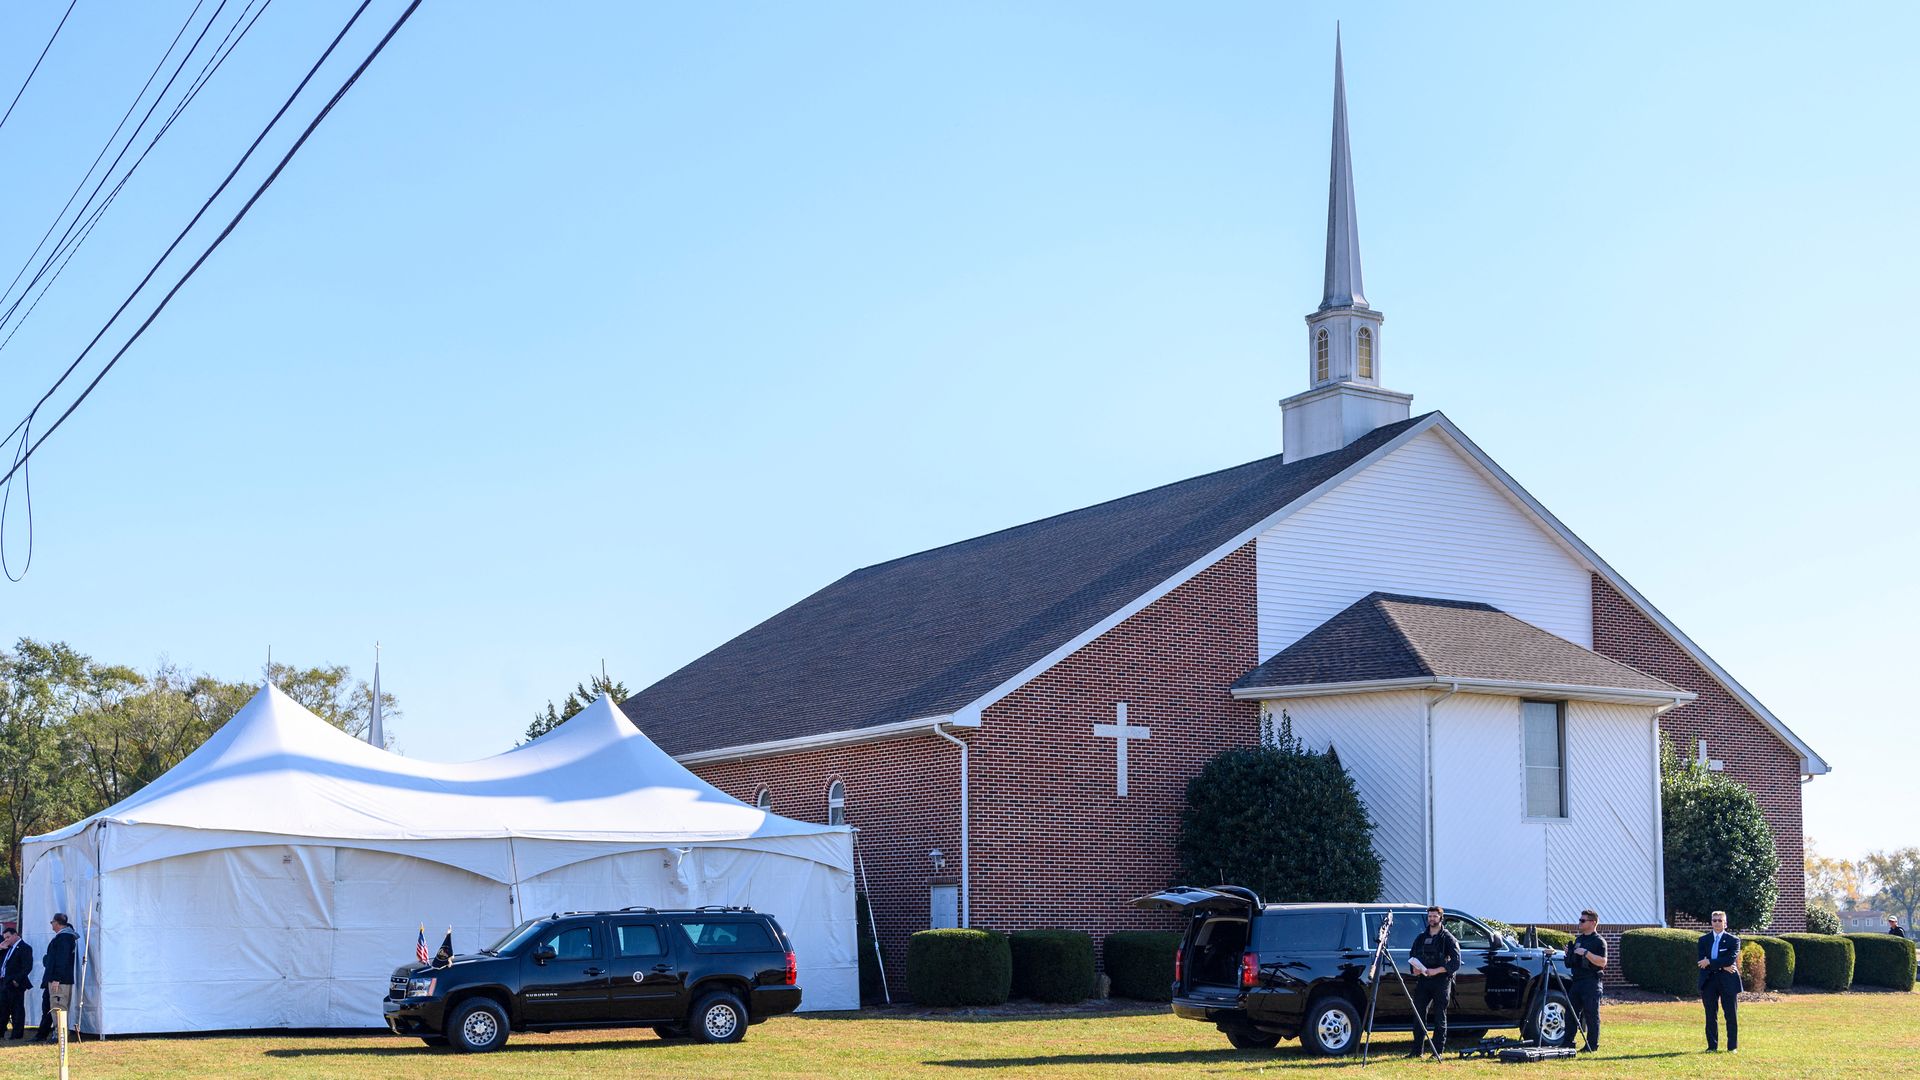 A presidential limousine is seen outside a church in Delaware when President Biden attended a funeral on Wednesday.